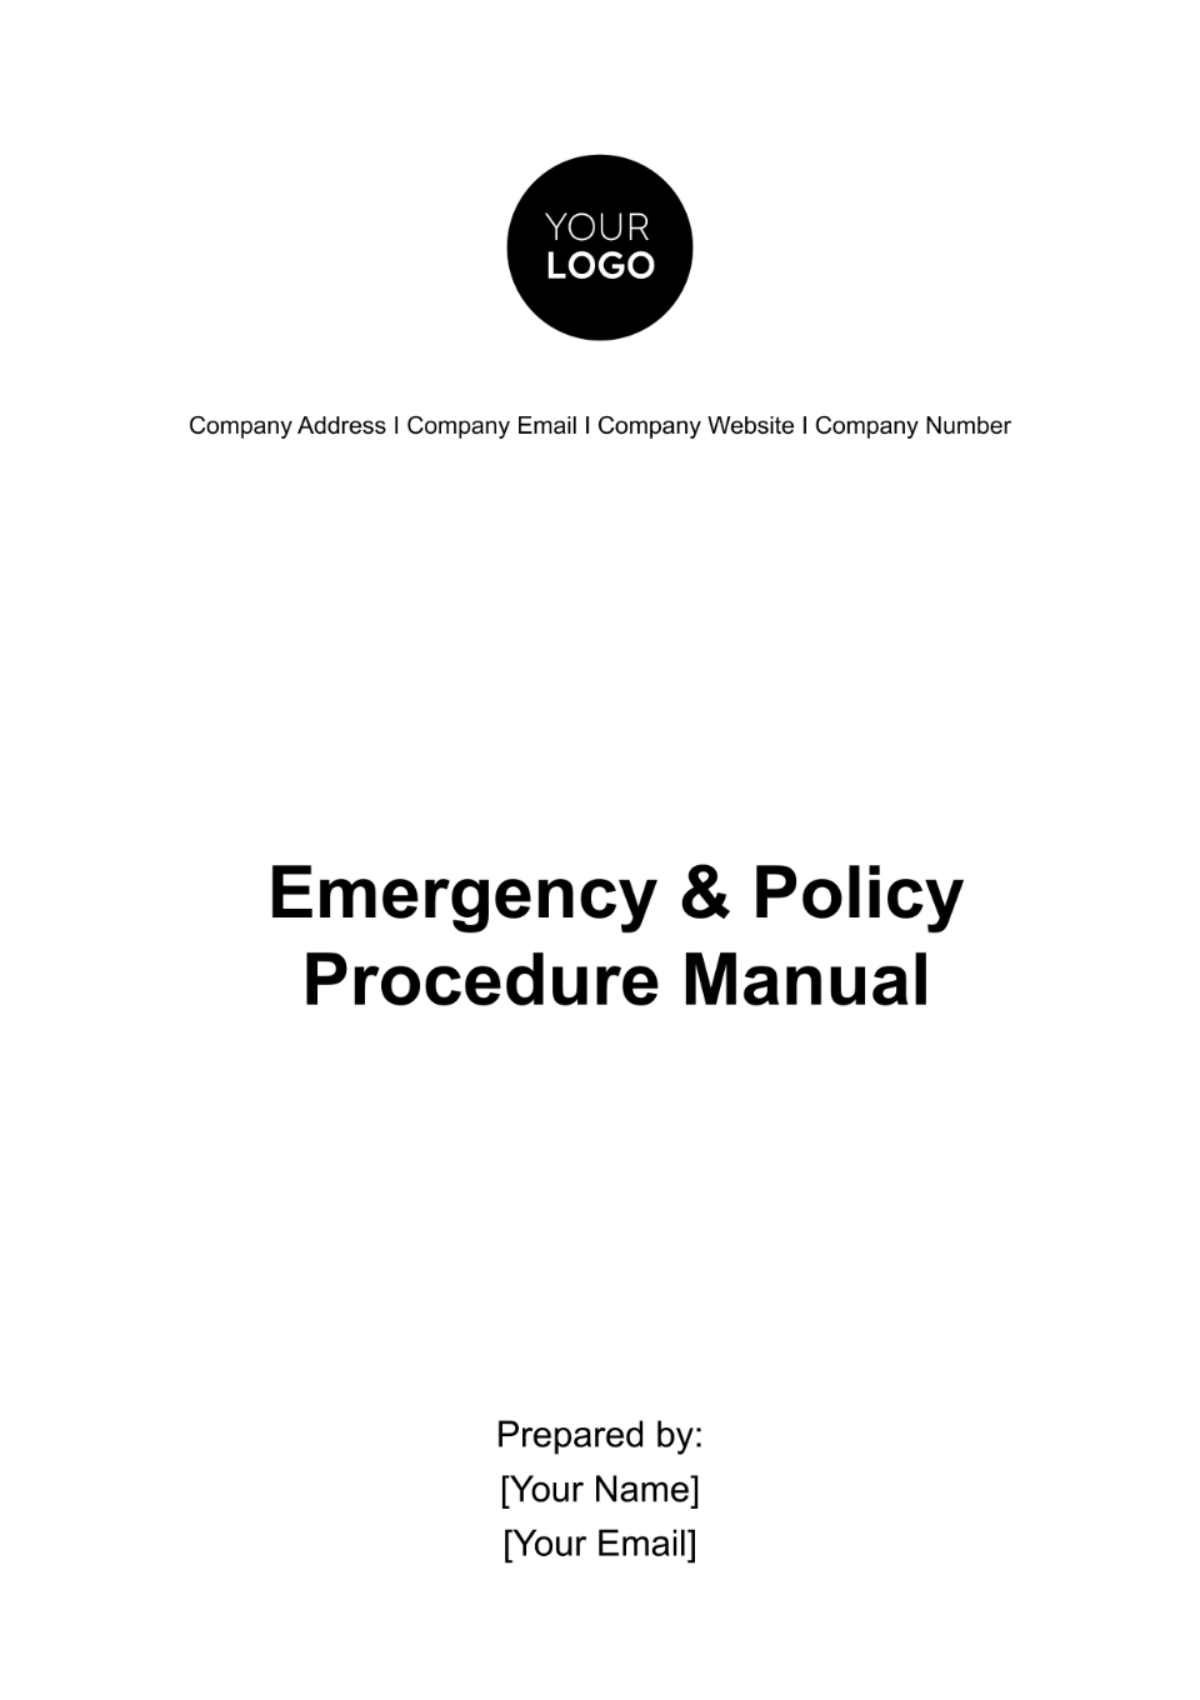 Emergency Policy & Procedure Manual Template